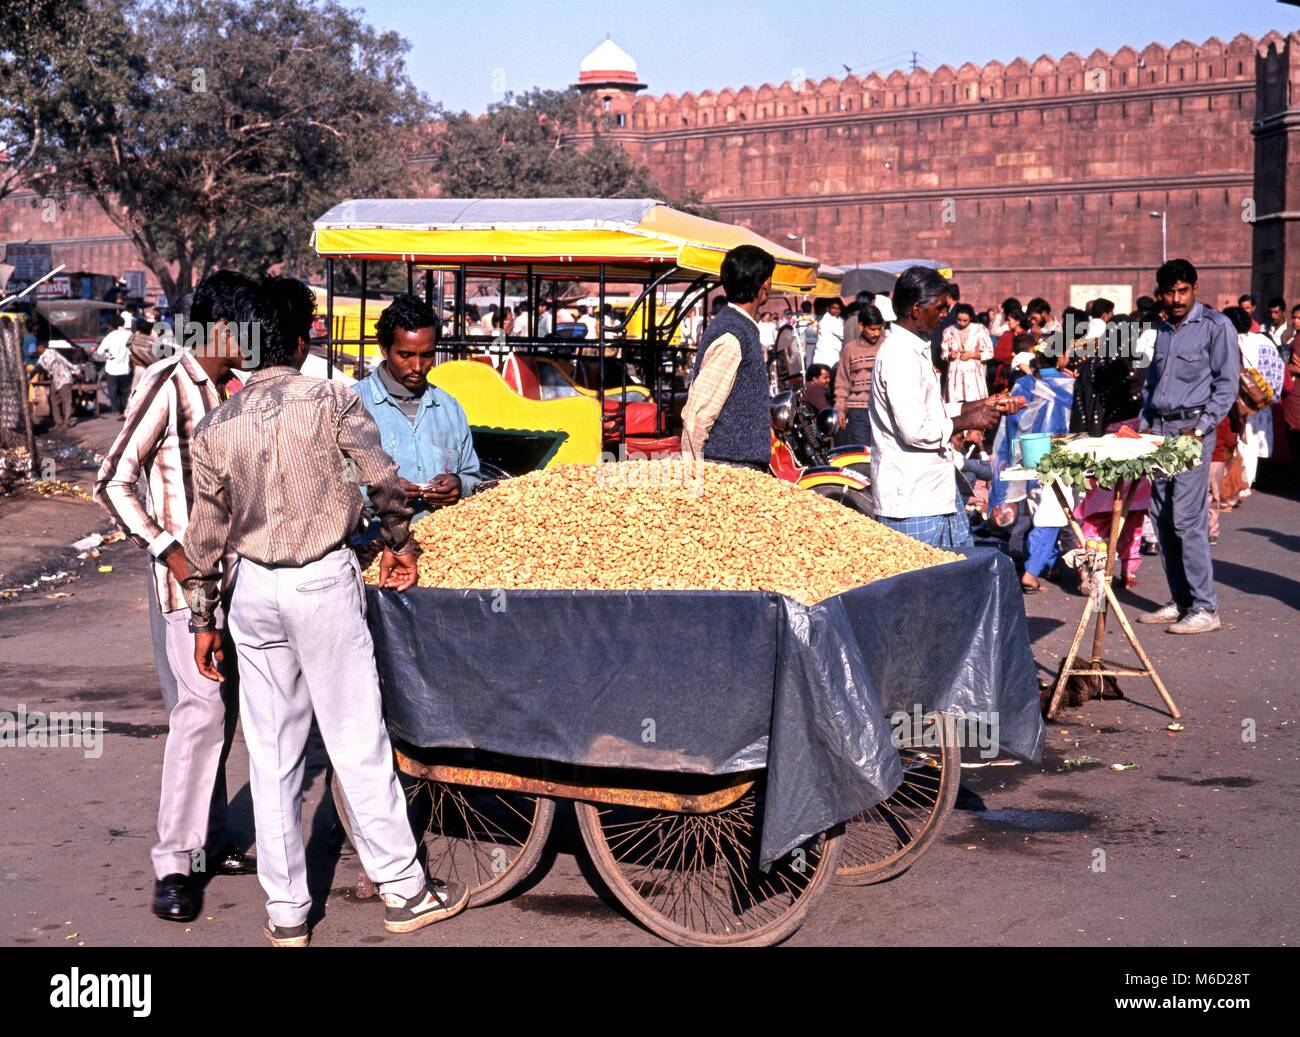 Roadside vegetable and snack stalls and seller outside the Red Fort, Delhi, Delhi Union Territory, India. Stock Photo